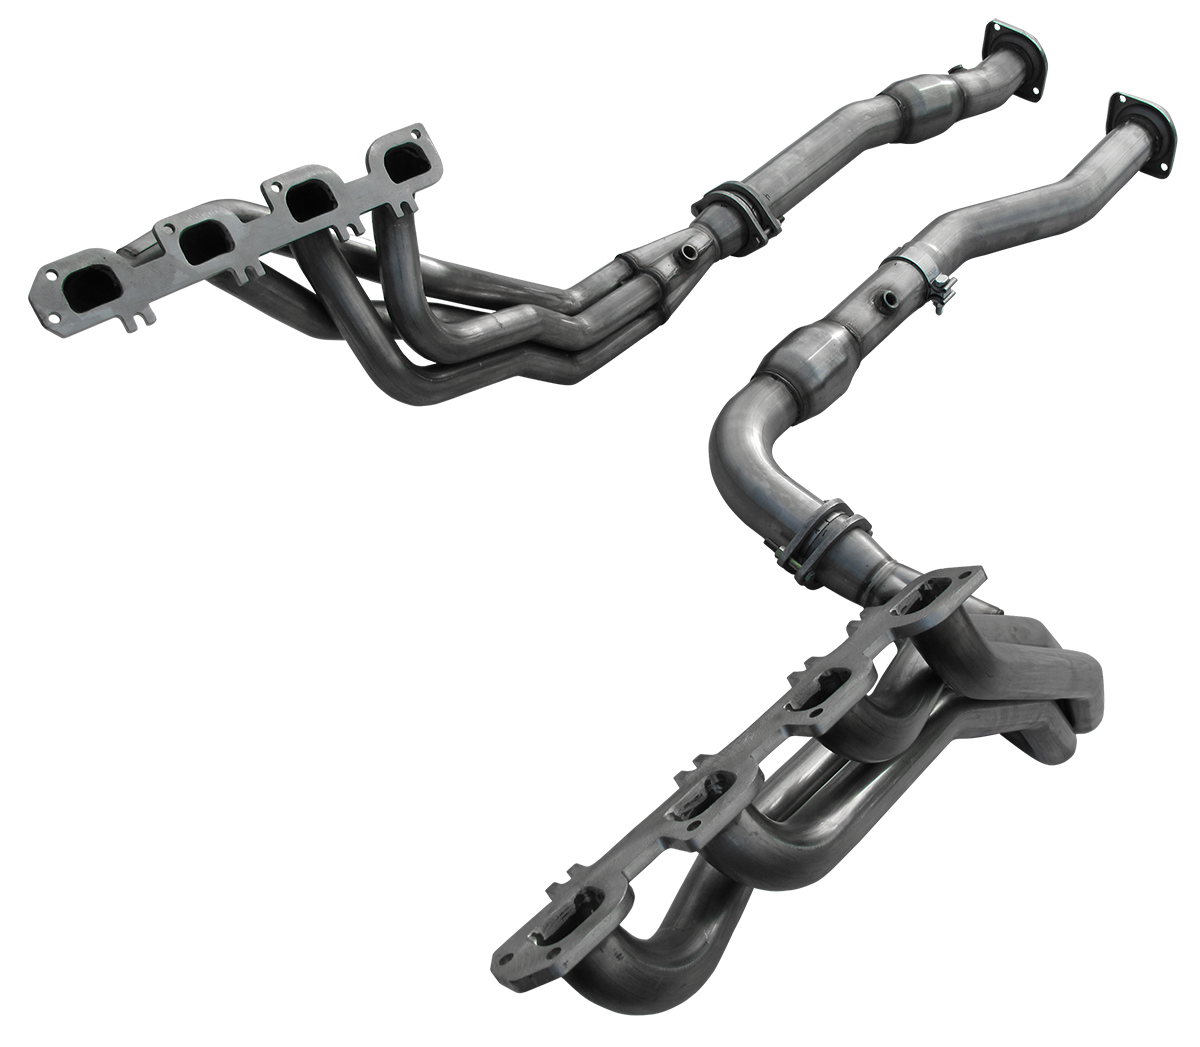 2006-2010 Jeep SRT8 6.1L V8 American Racing Headers 1 3/4" x 3" Long Tube Headers w/3" Catted Connection Pipes